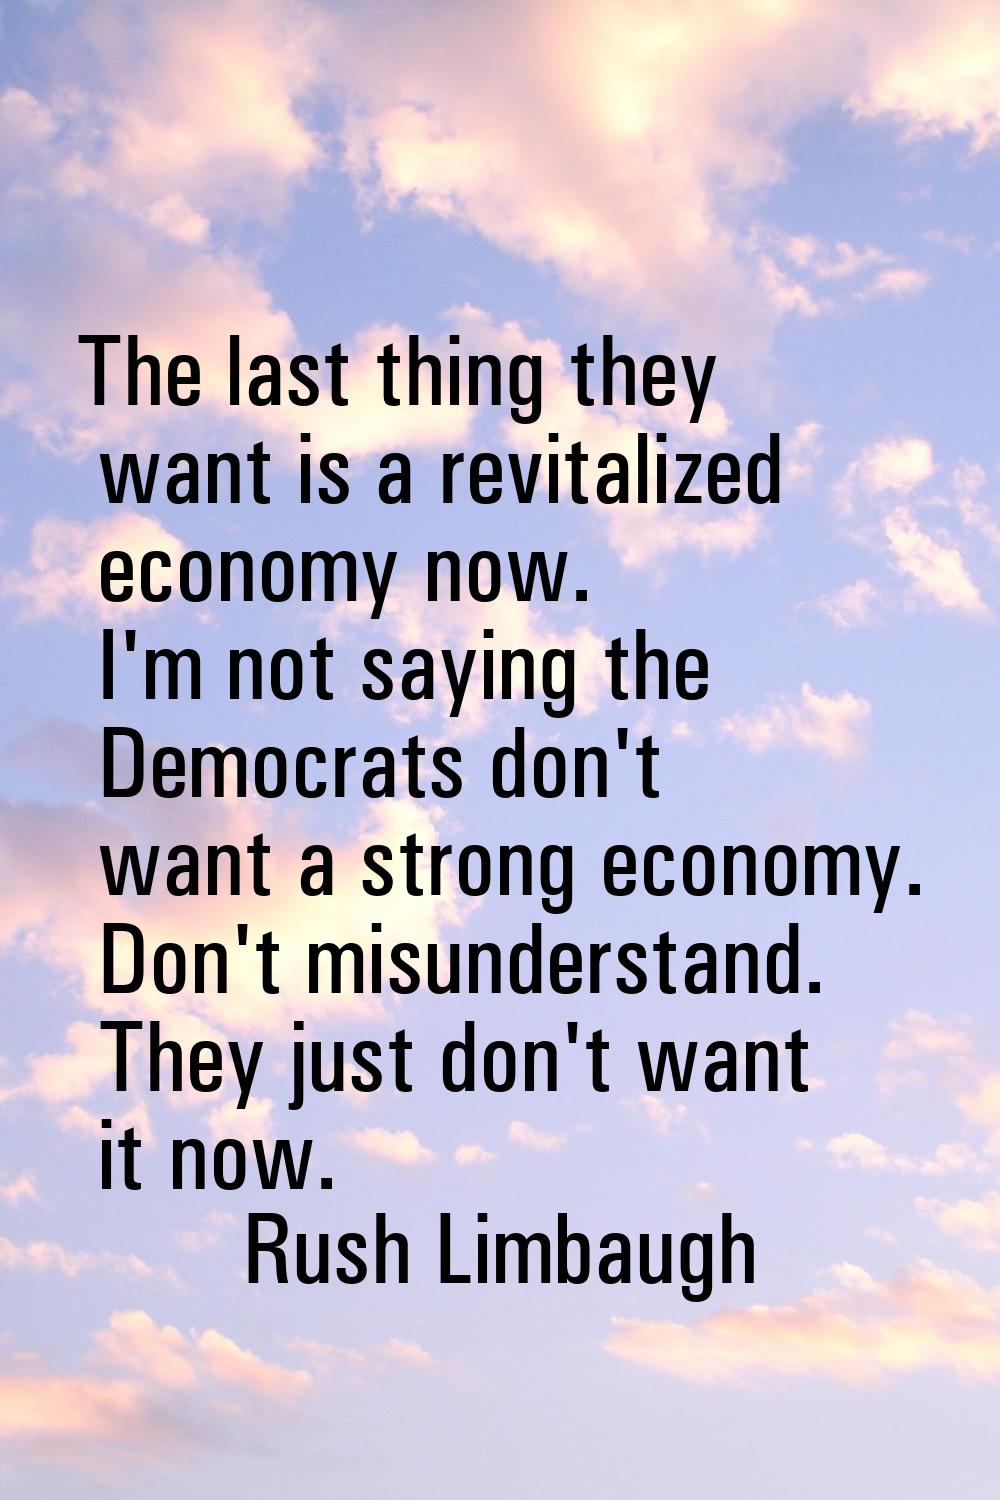 The last thing they want is a revitalized economy now. I'm not saying the Democrats don't want a st